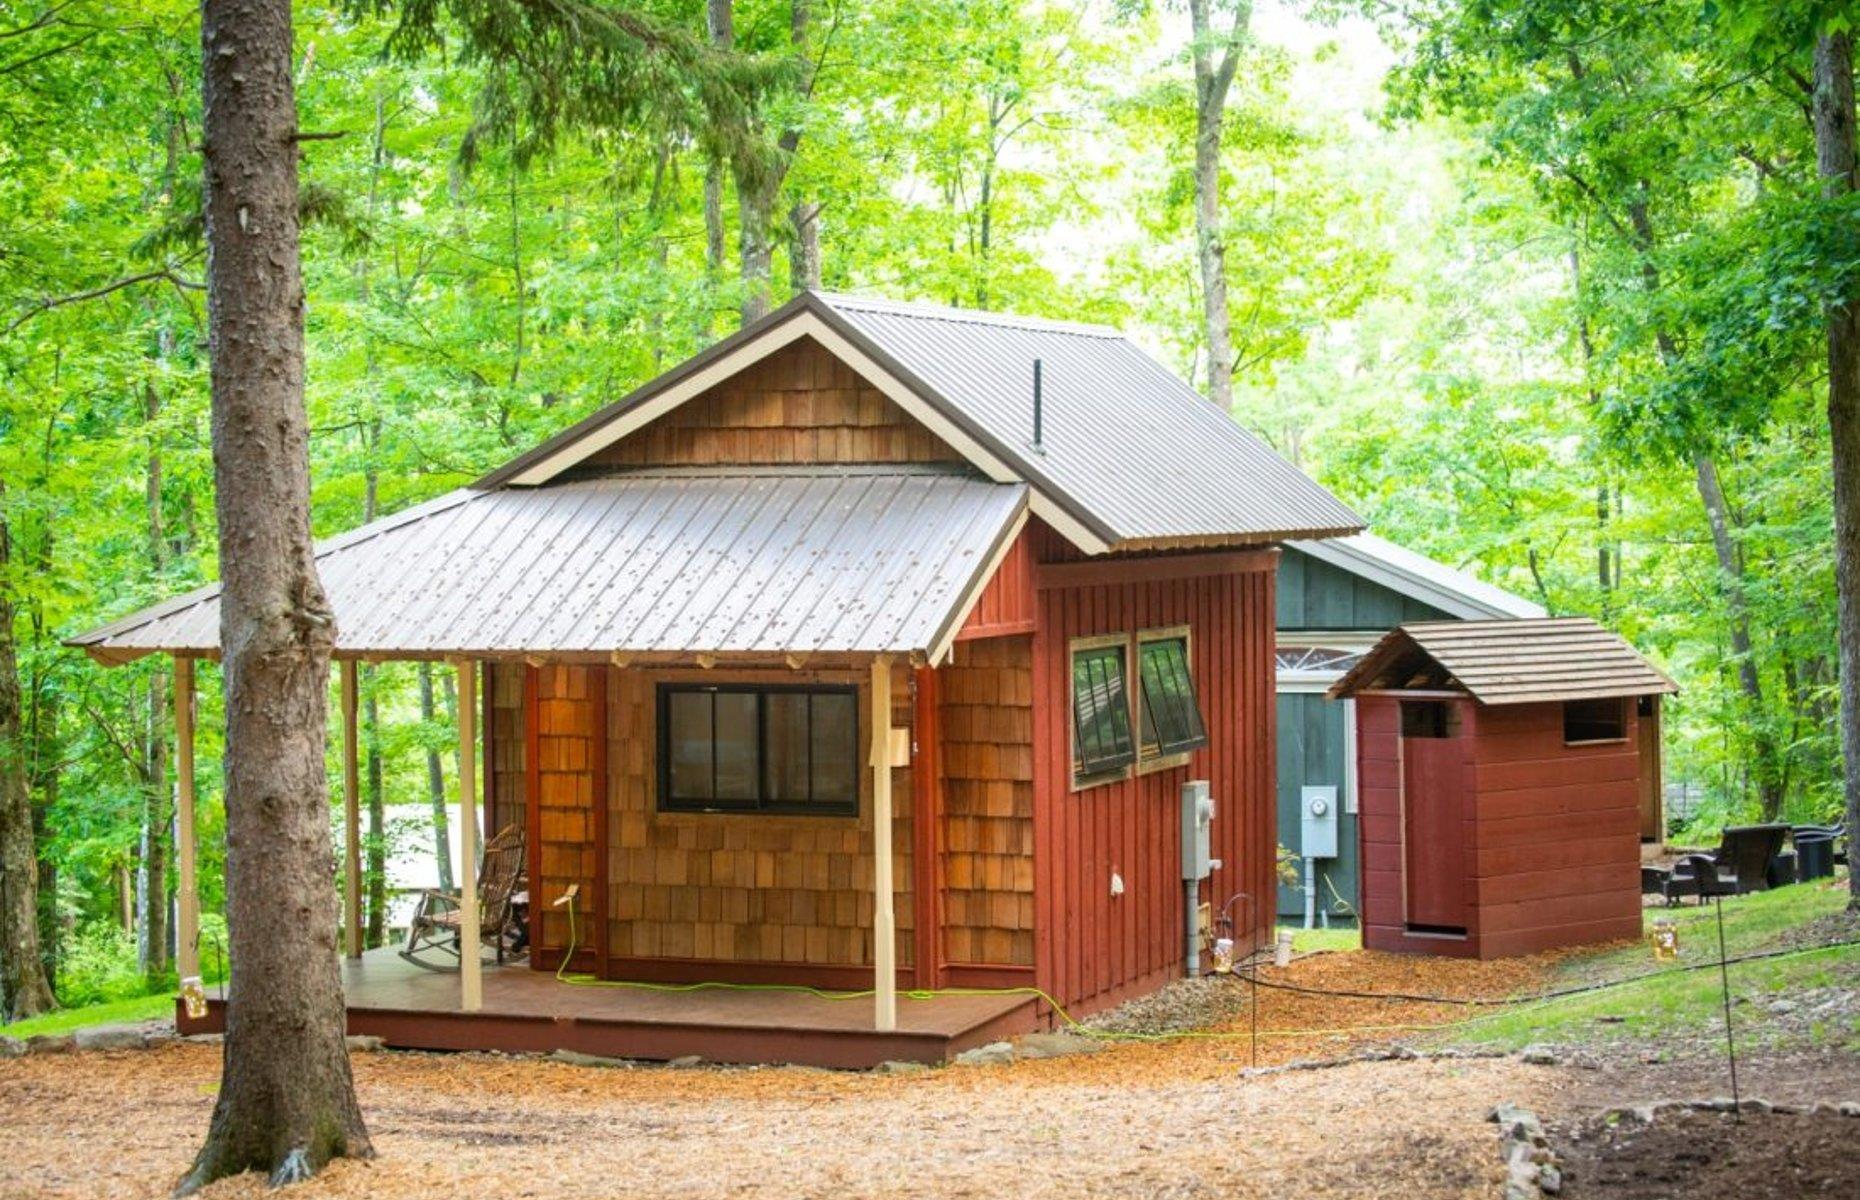 <p>Sustainability sits at the forefront of Maryland’s vision for the future and, with 49 green stays available, visitors can support that mission too. Opt for the eco-conscious <a href="https://bluemoonrising.org/">Blue Moon Rising</a>, hidden near Deep Creek Lake, and enjoy Maryland’s wilderness while sleeping in a cozy wooden cabin. </p>